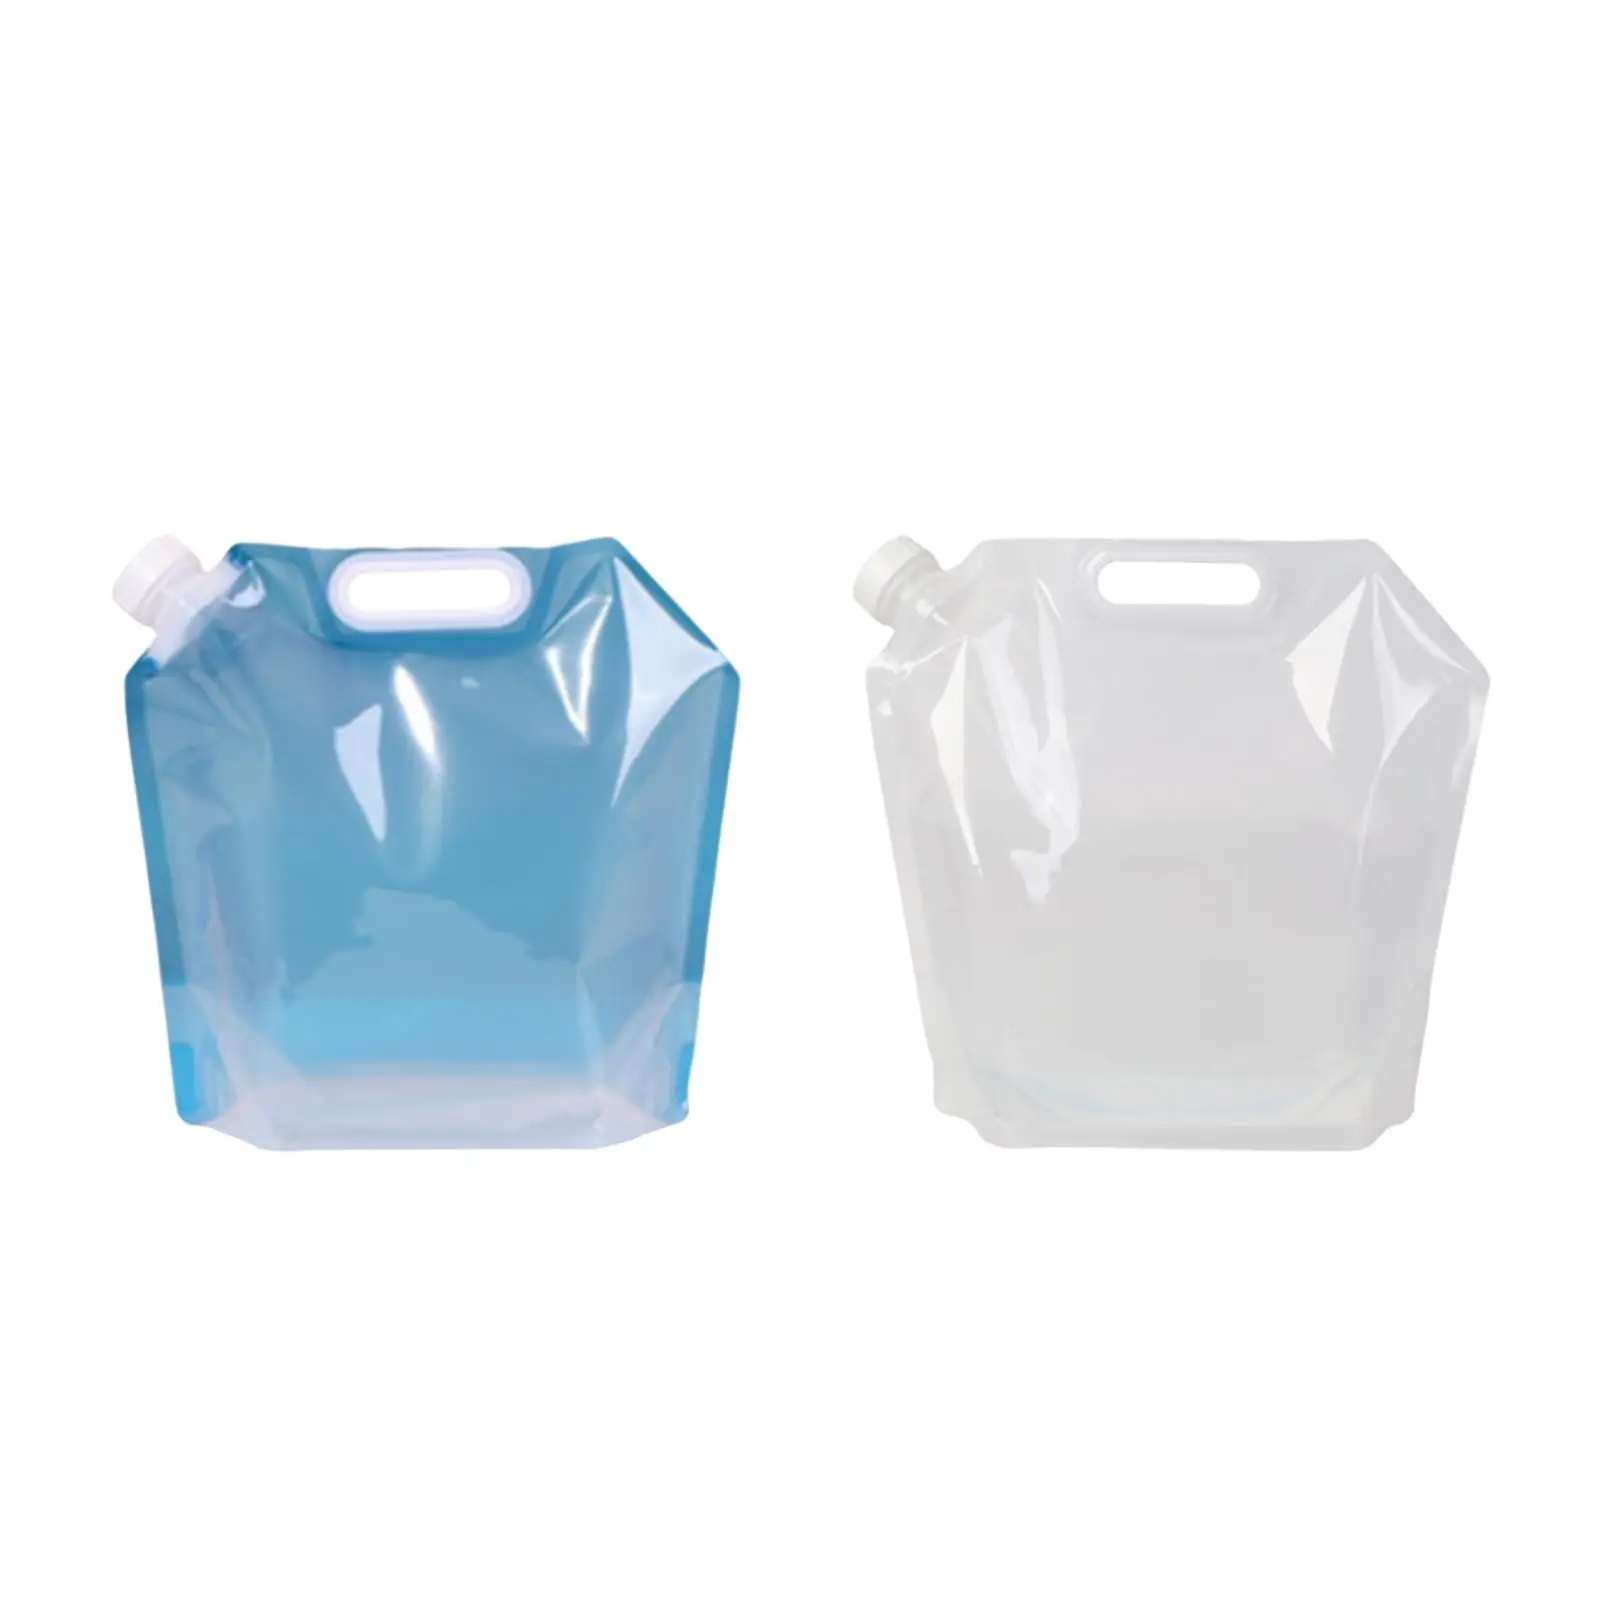 Collapsible Water Storage Bag Container 5L Outdoor Drinking Tool 32.5x30cm